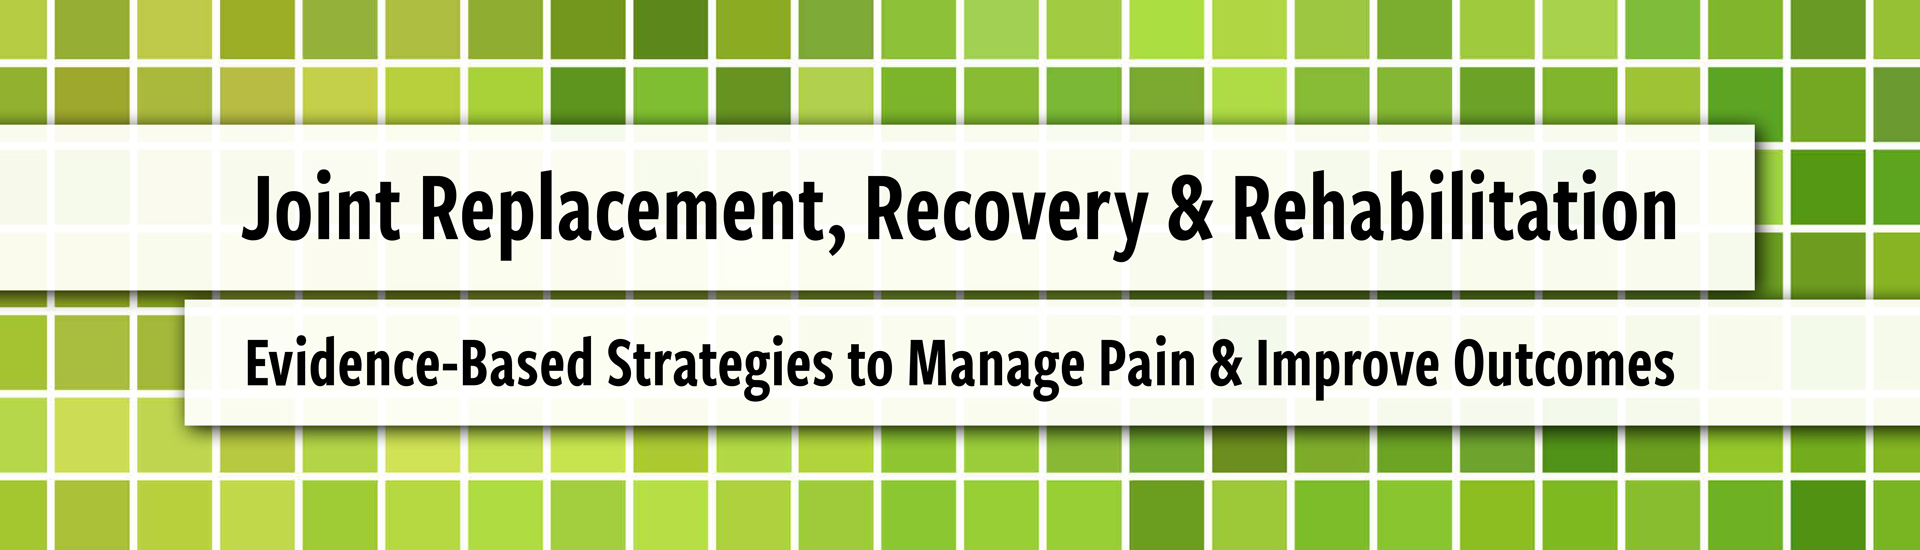 Joint Replacement, Recovery & Rehabilitation: Evidence-Based Strategies to Manage Pain & Improve Outcomes